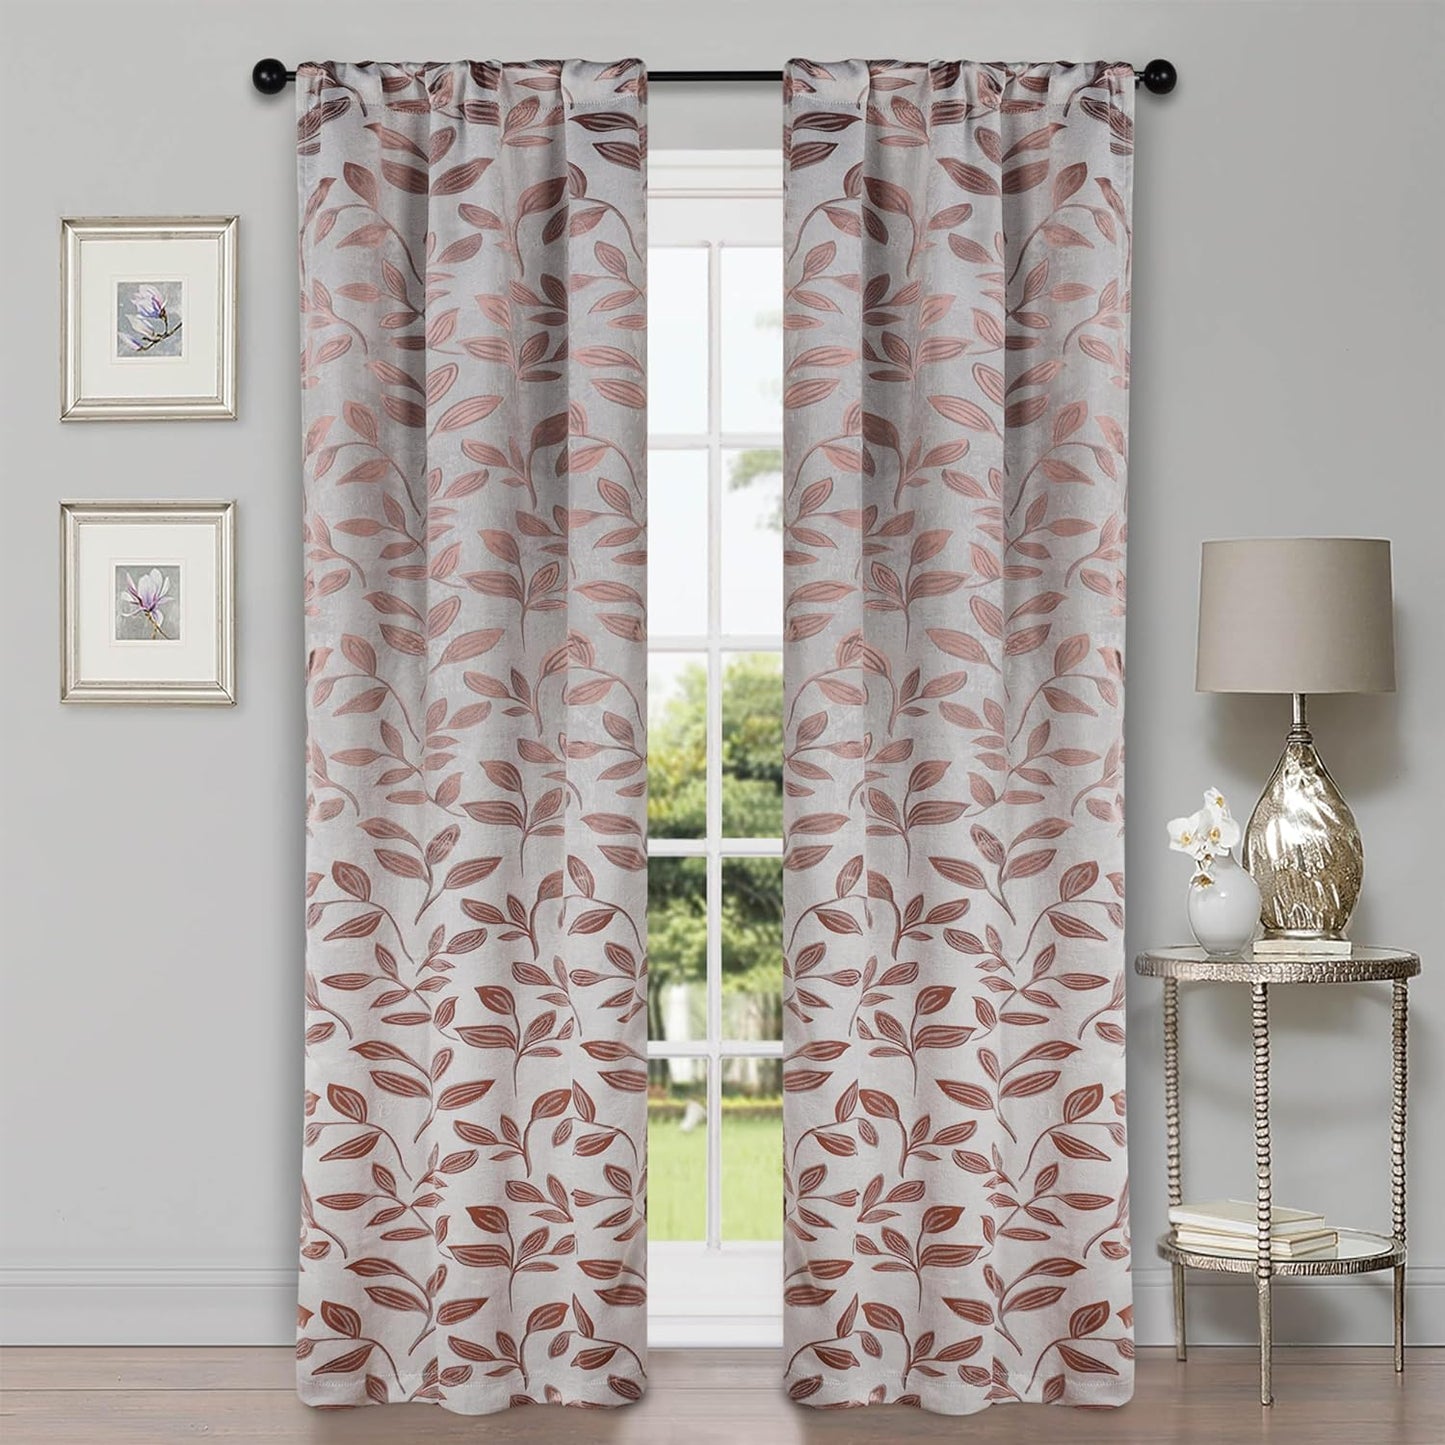 Superior Blackout Curtains, Room Darkening Window Accent for Bedroom, Sun Blocking, Thermal, Modern Bohemian Curtains, Leaves Collection, Set of 2 Panels, Rod Pocket - 52 in X 63 In, Nickel Black  Home City Inc. Champagne 26 In X 84 In (W X L) 